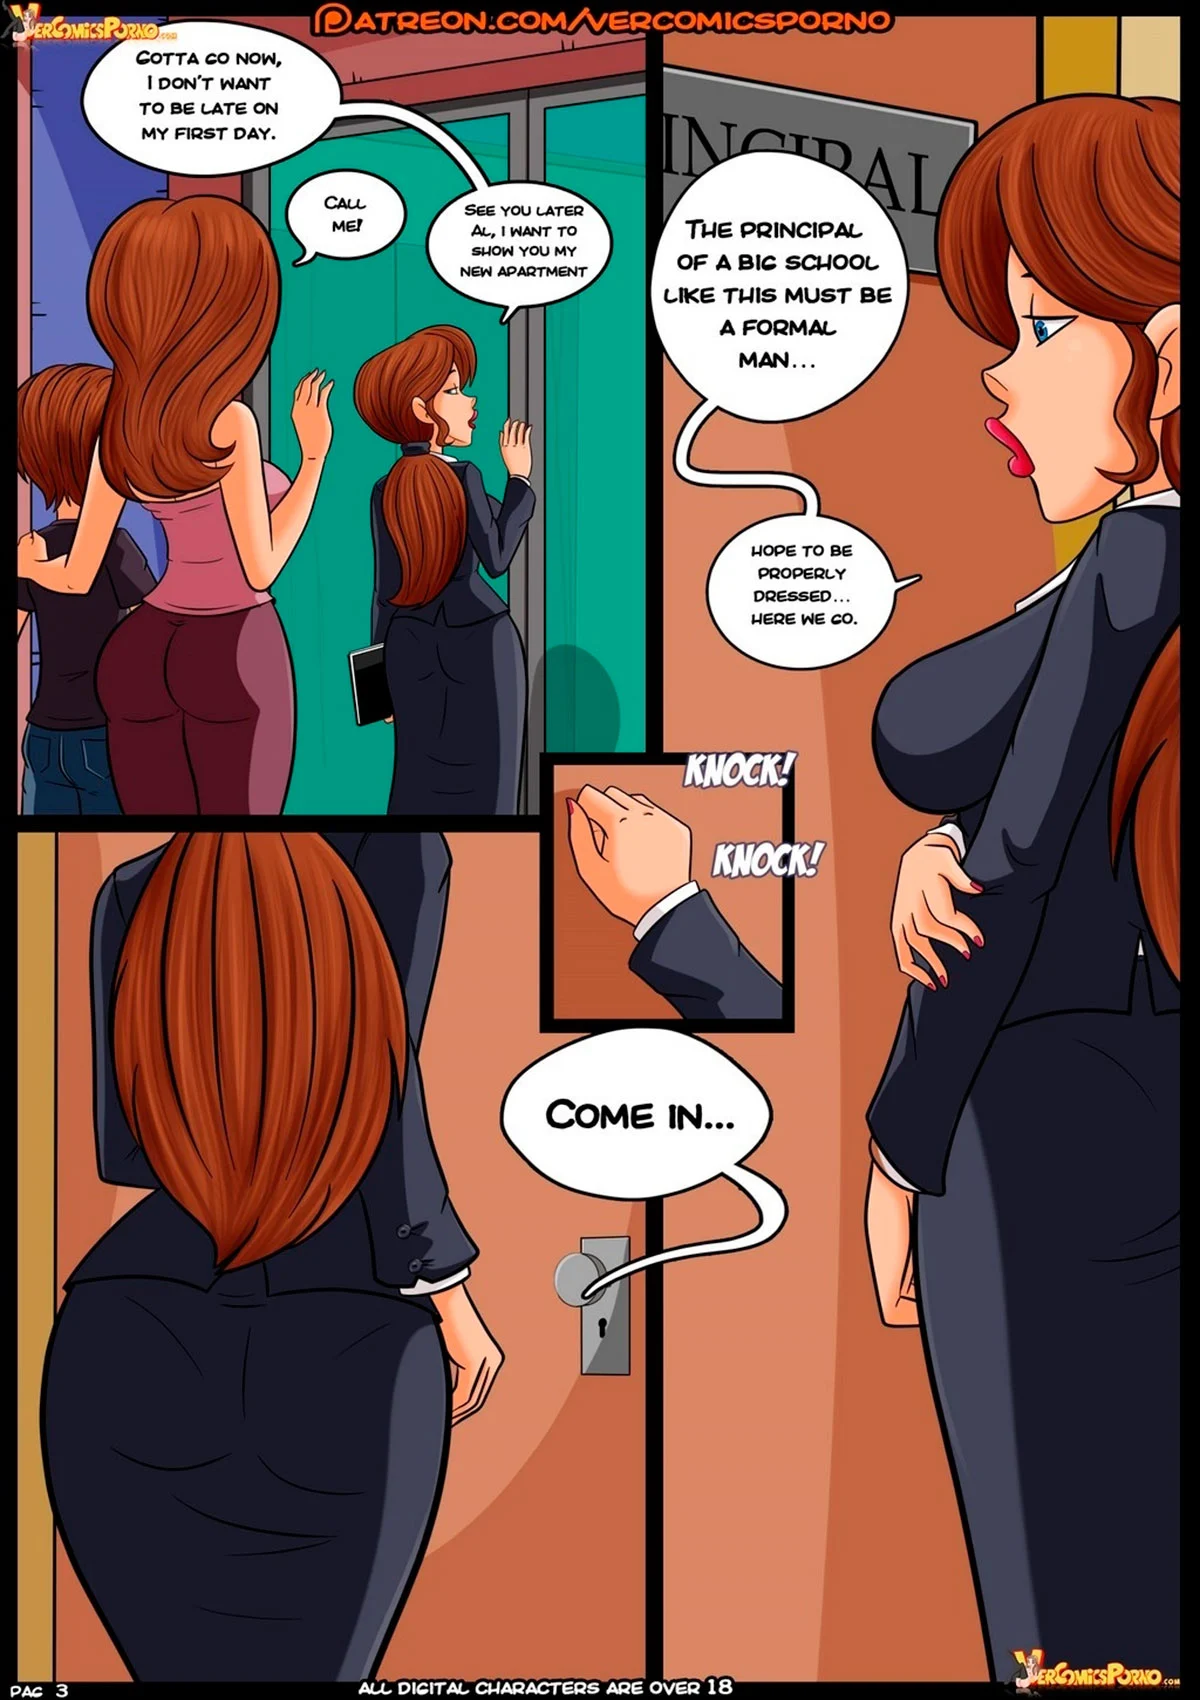 Croc comic "Valery Chronicles" - page 3